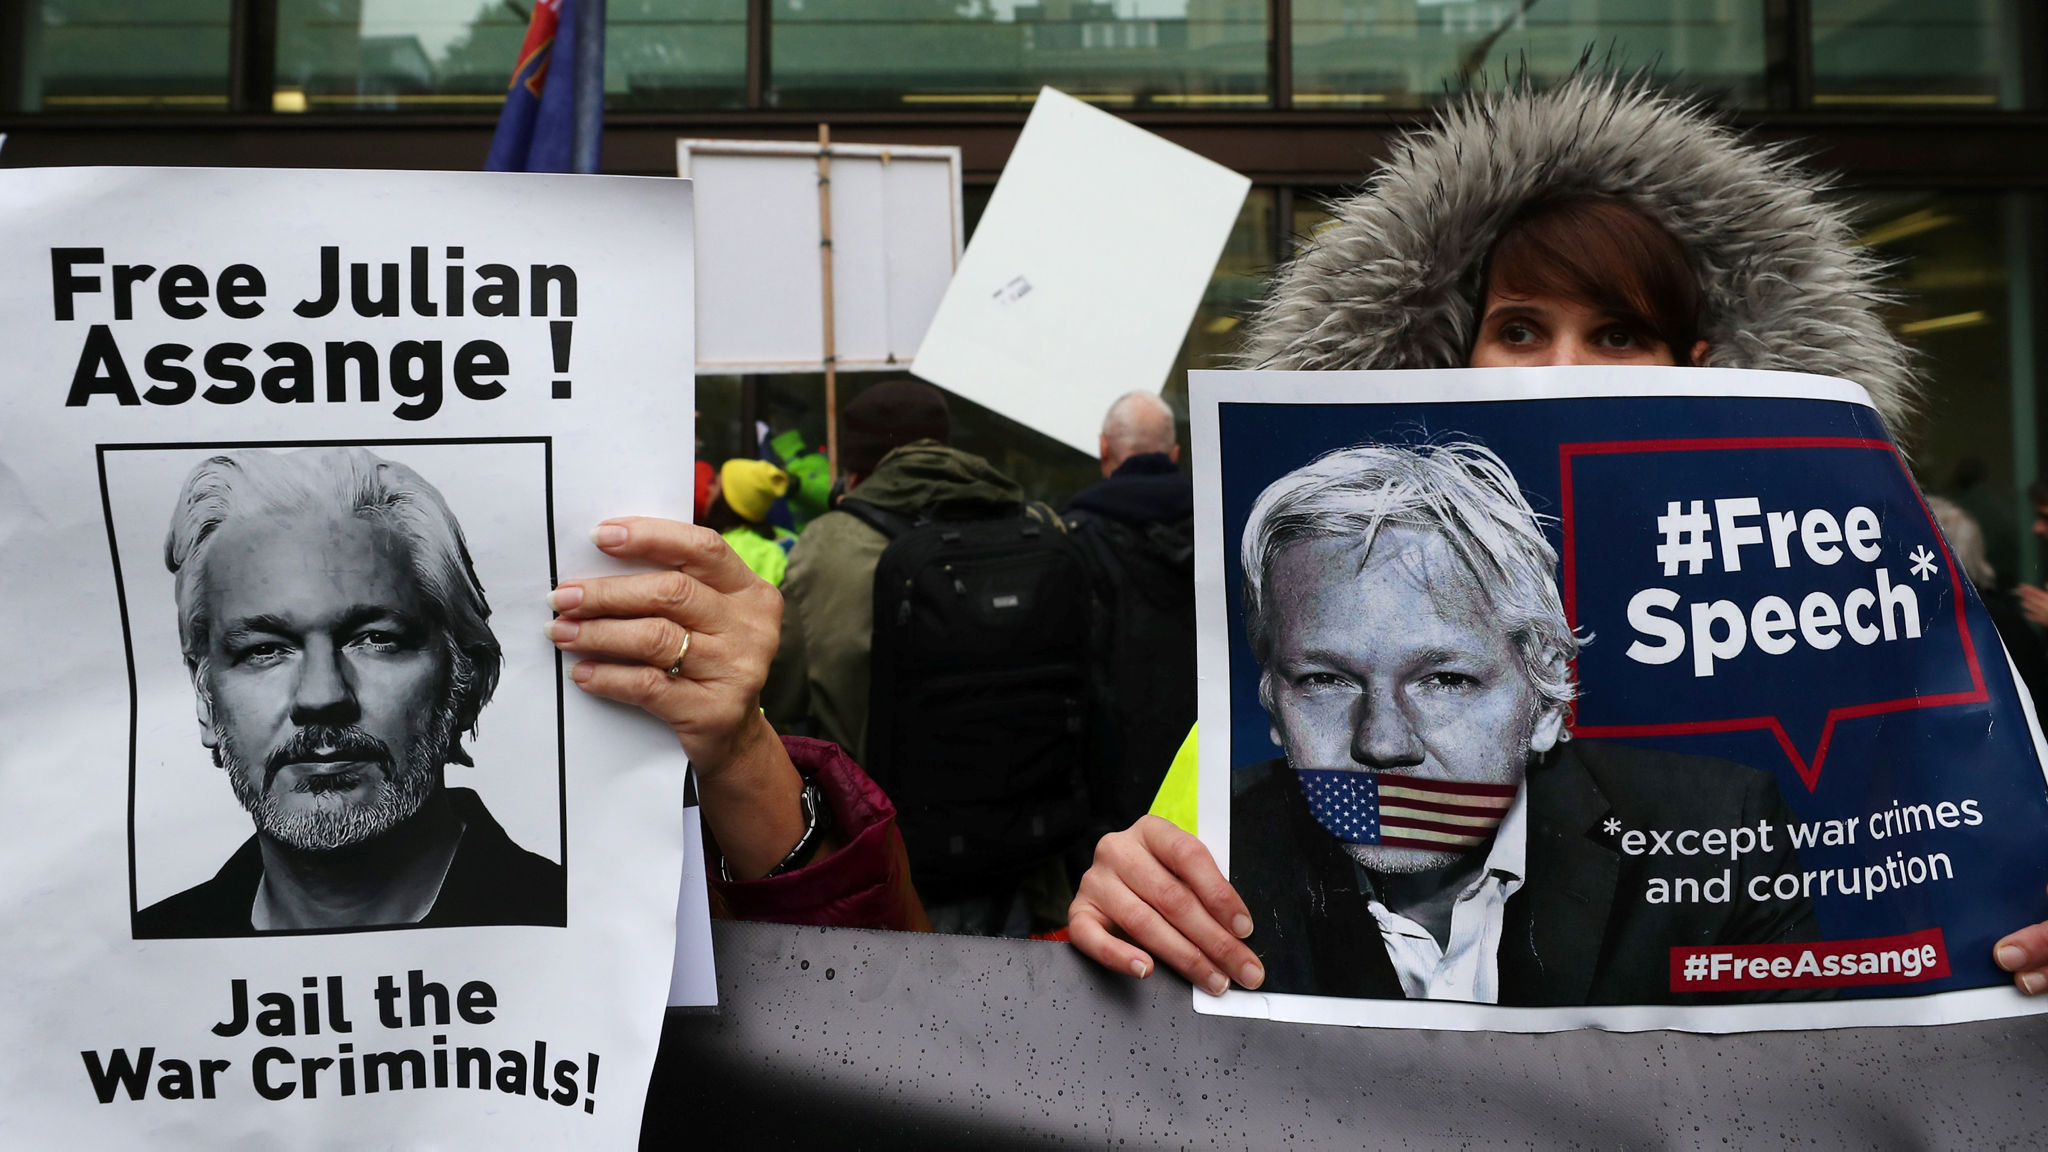 UN rights chief concerned over Assange extradition case, Wikileaks continues to collect large sums of crypto